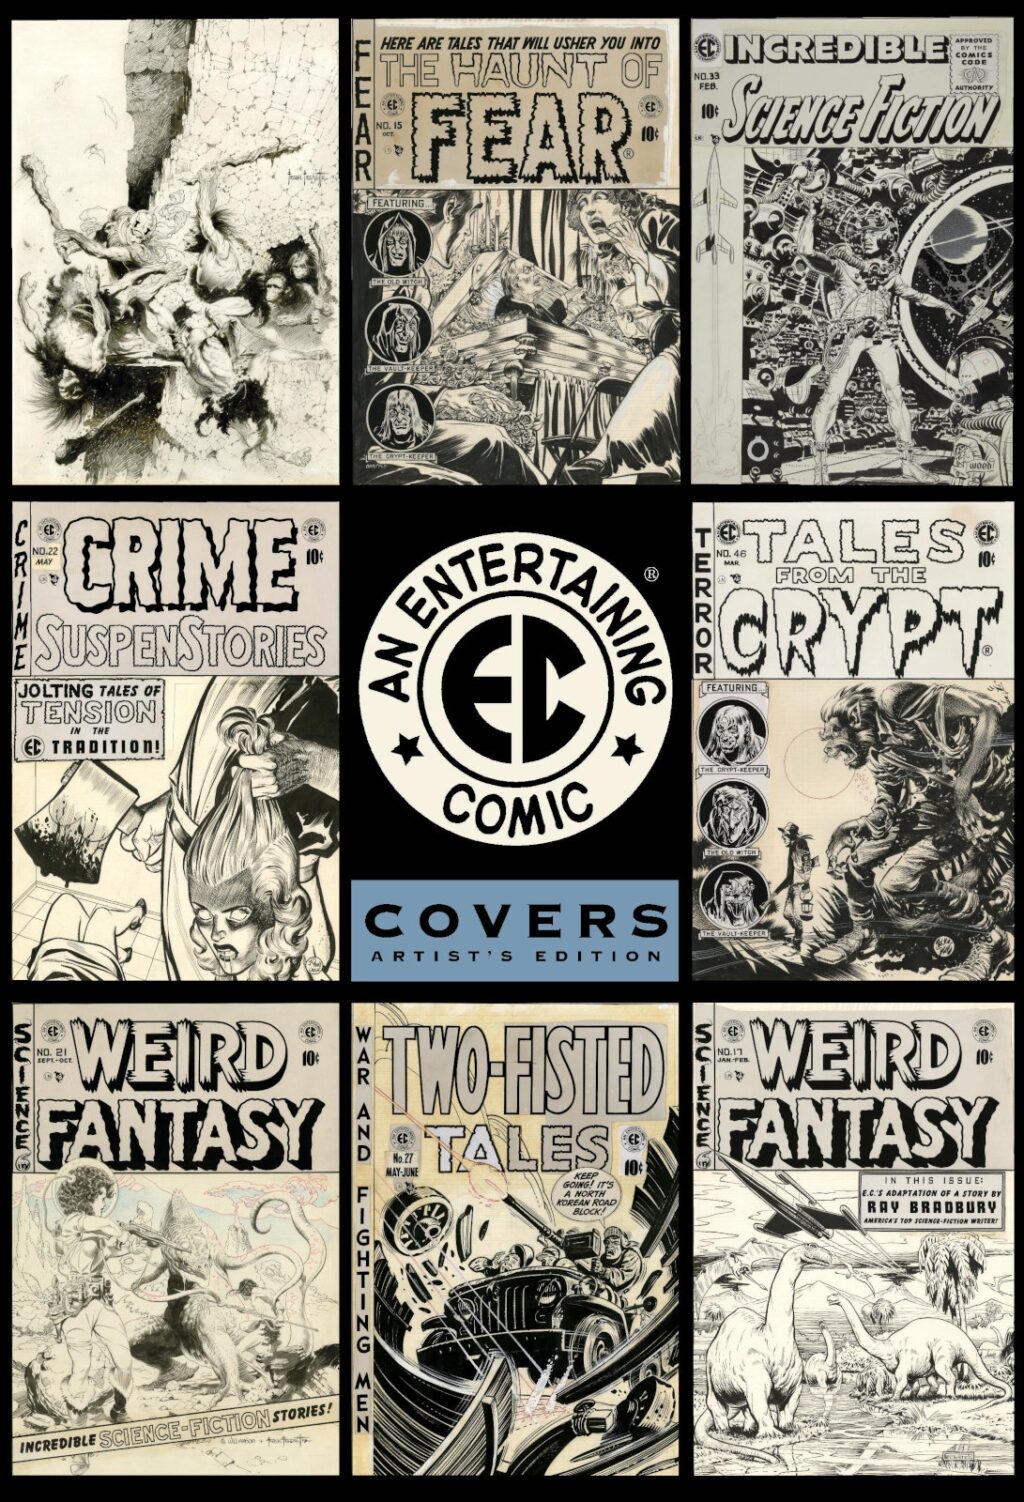 EC Covers Artist's Edition cover